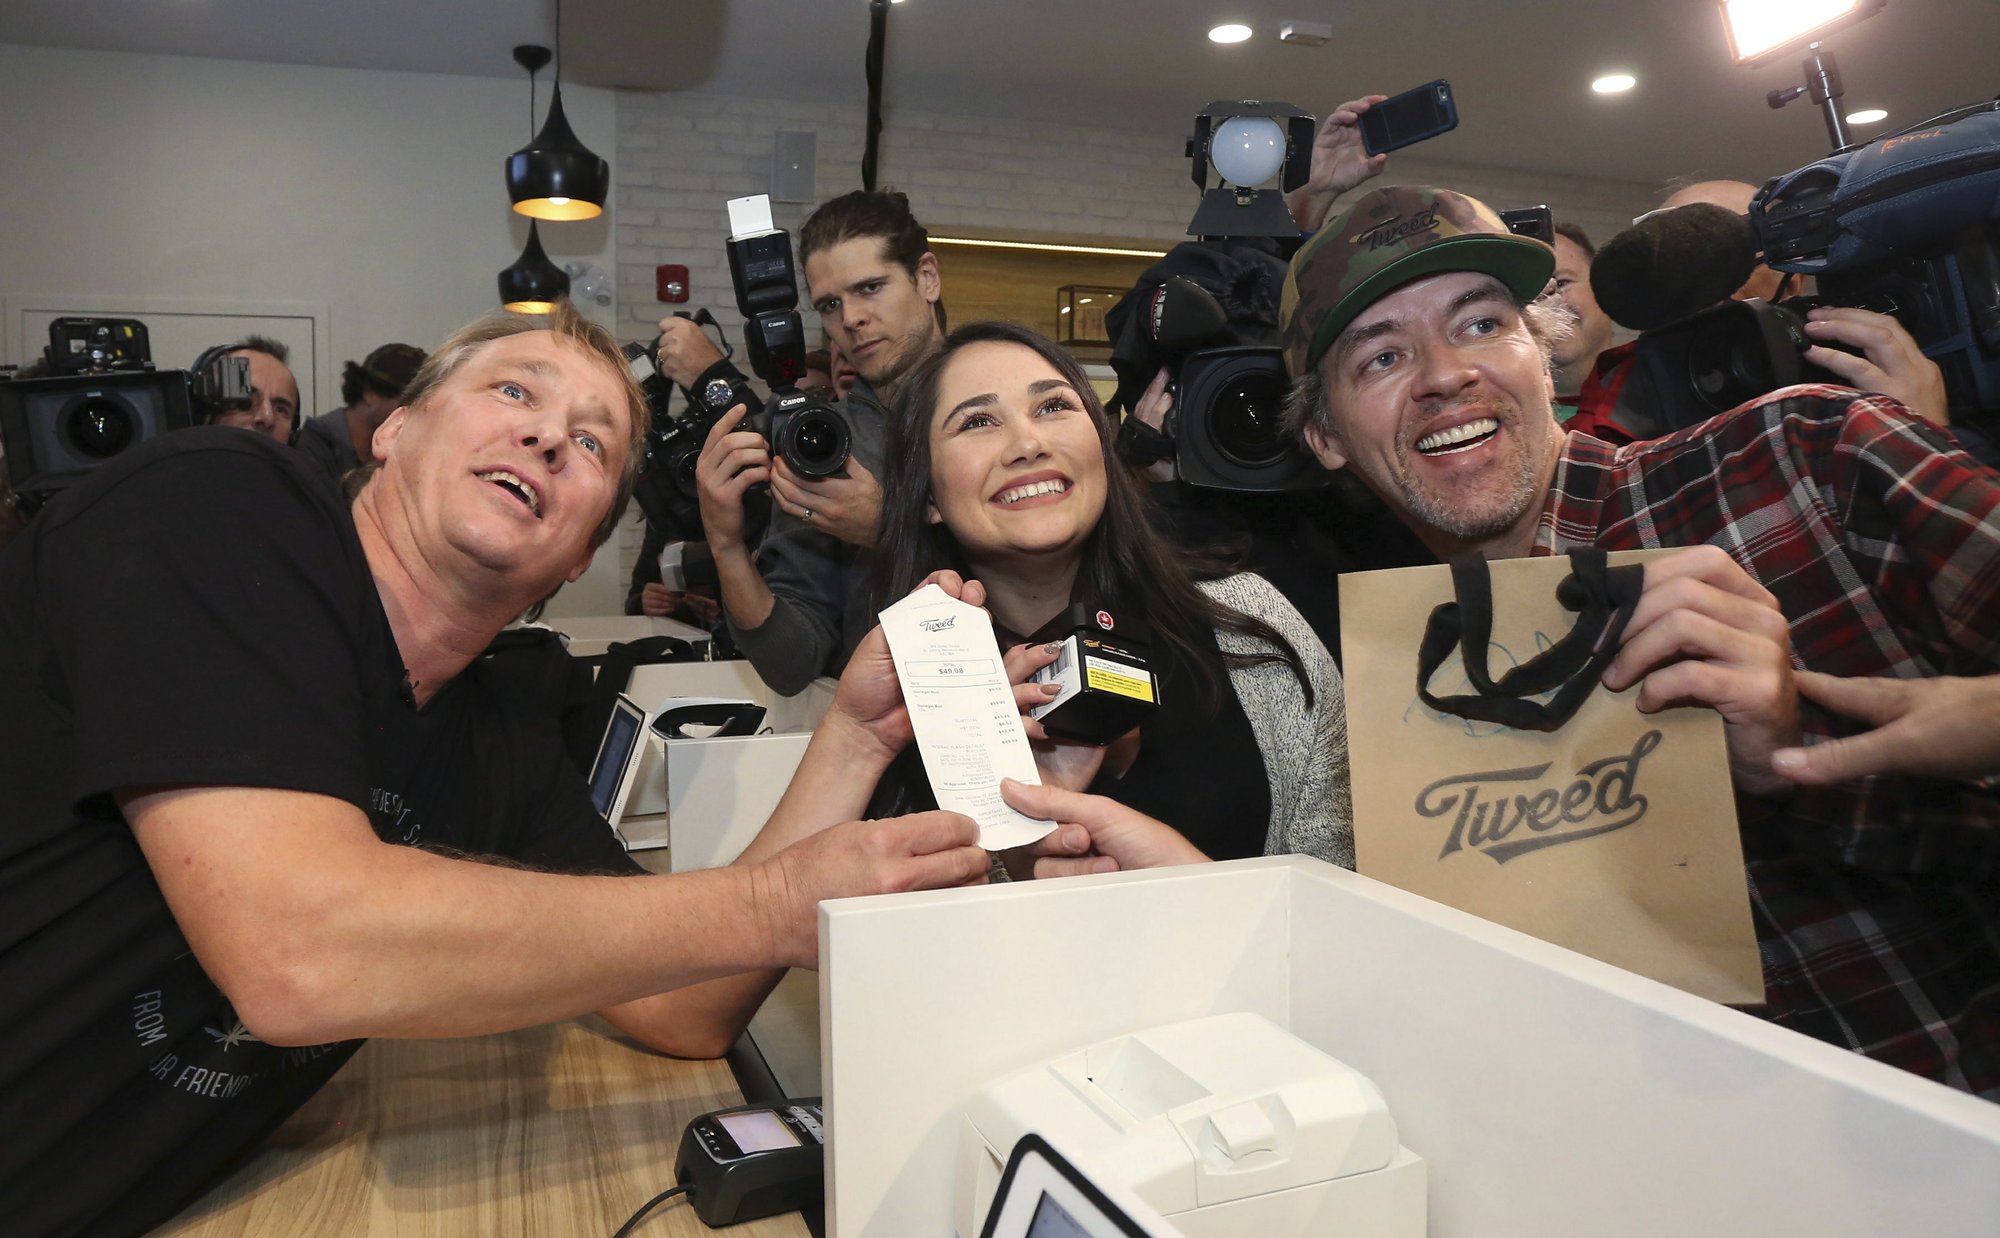 Canopy Growth CEO Bruce Linton, left to right, poses with the receipt for the first legal cannabis for recreation use sold in Canada to Nikki Rose and Ian Power at the Tweed shop on Water Street in St. John's N.L. at 12:01 am NDT on Wednesday Oct. 17, 2018. 